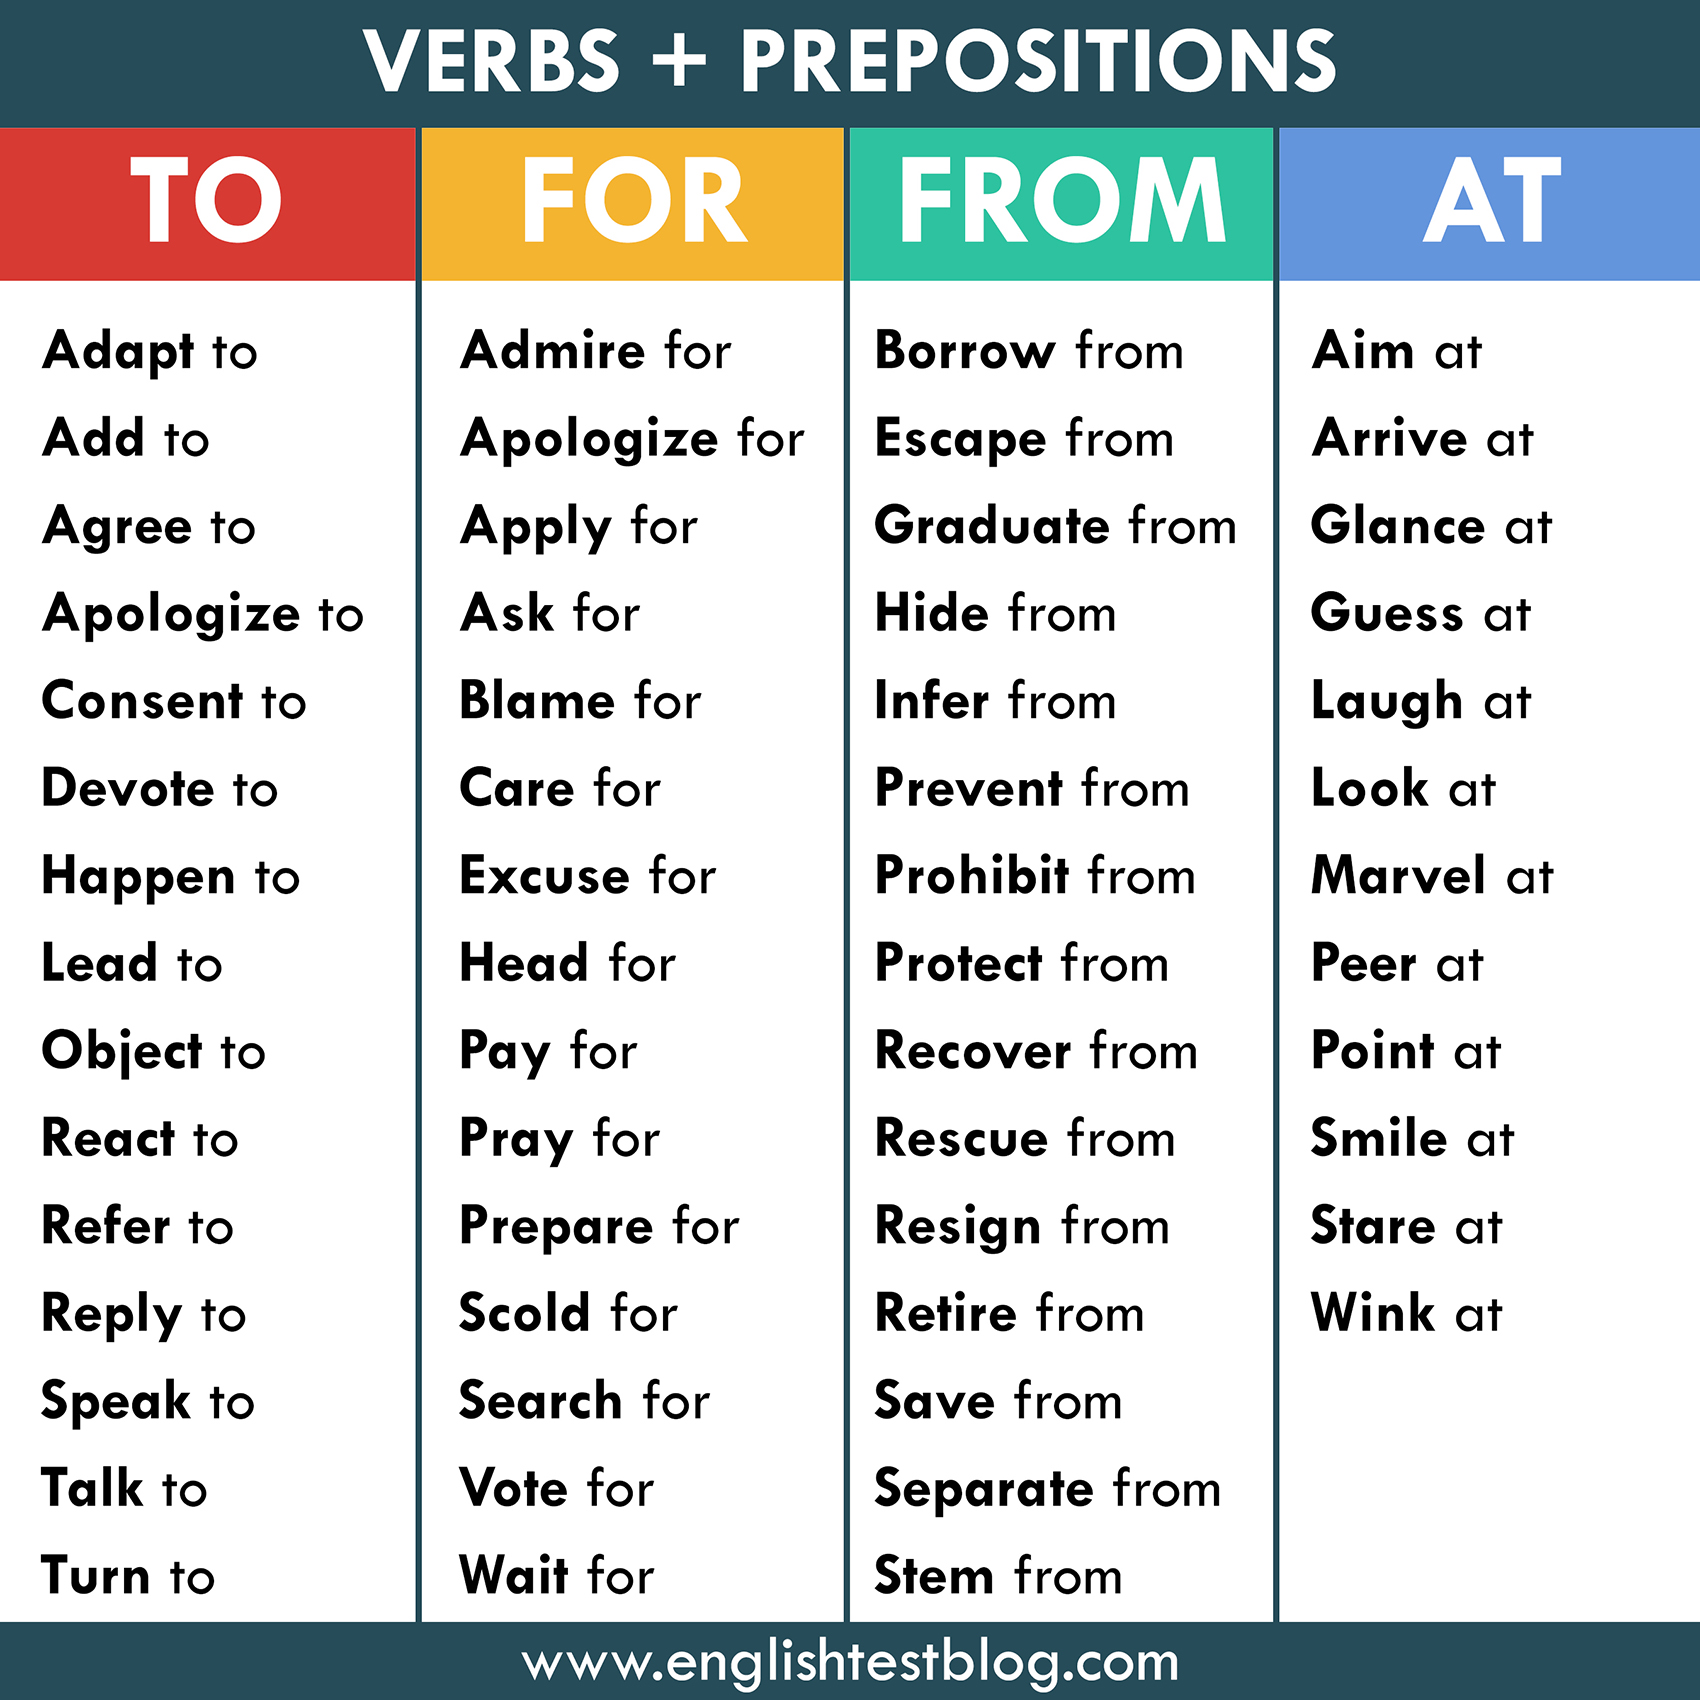 English prepositions after the verb THINK - Espresso English